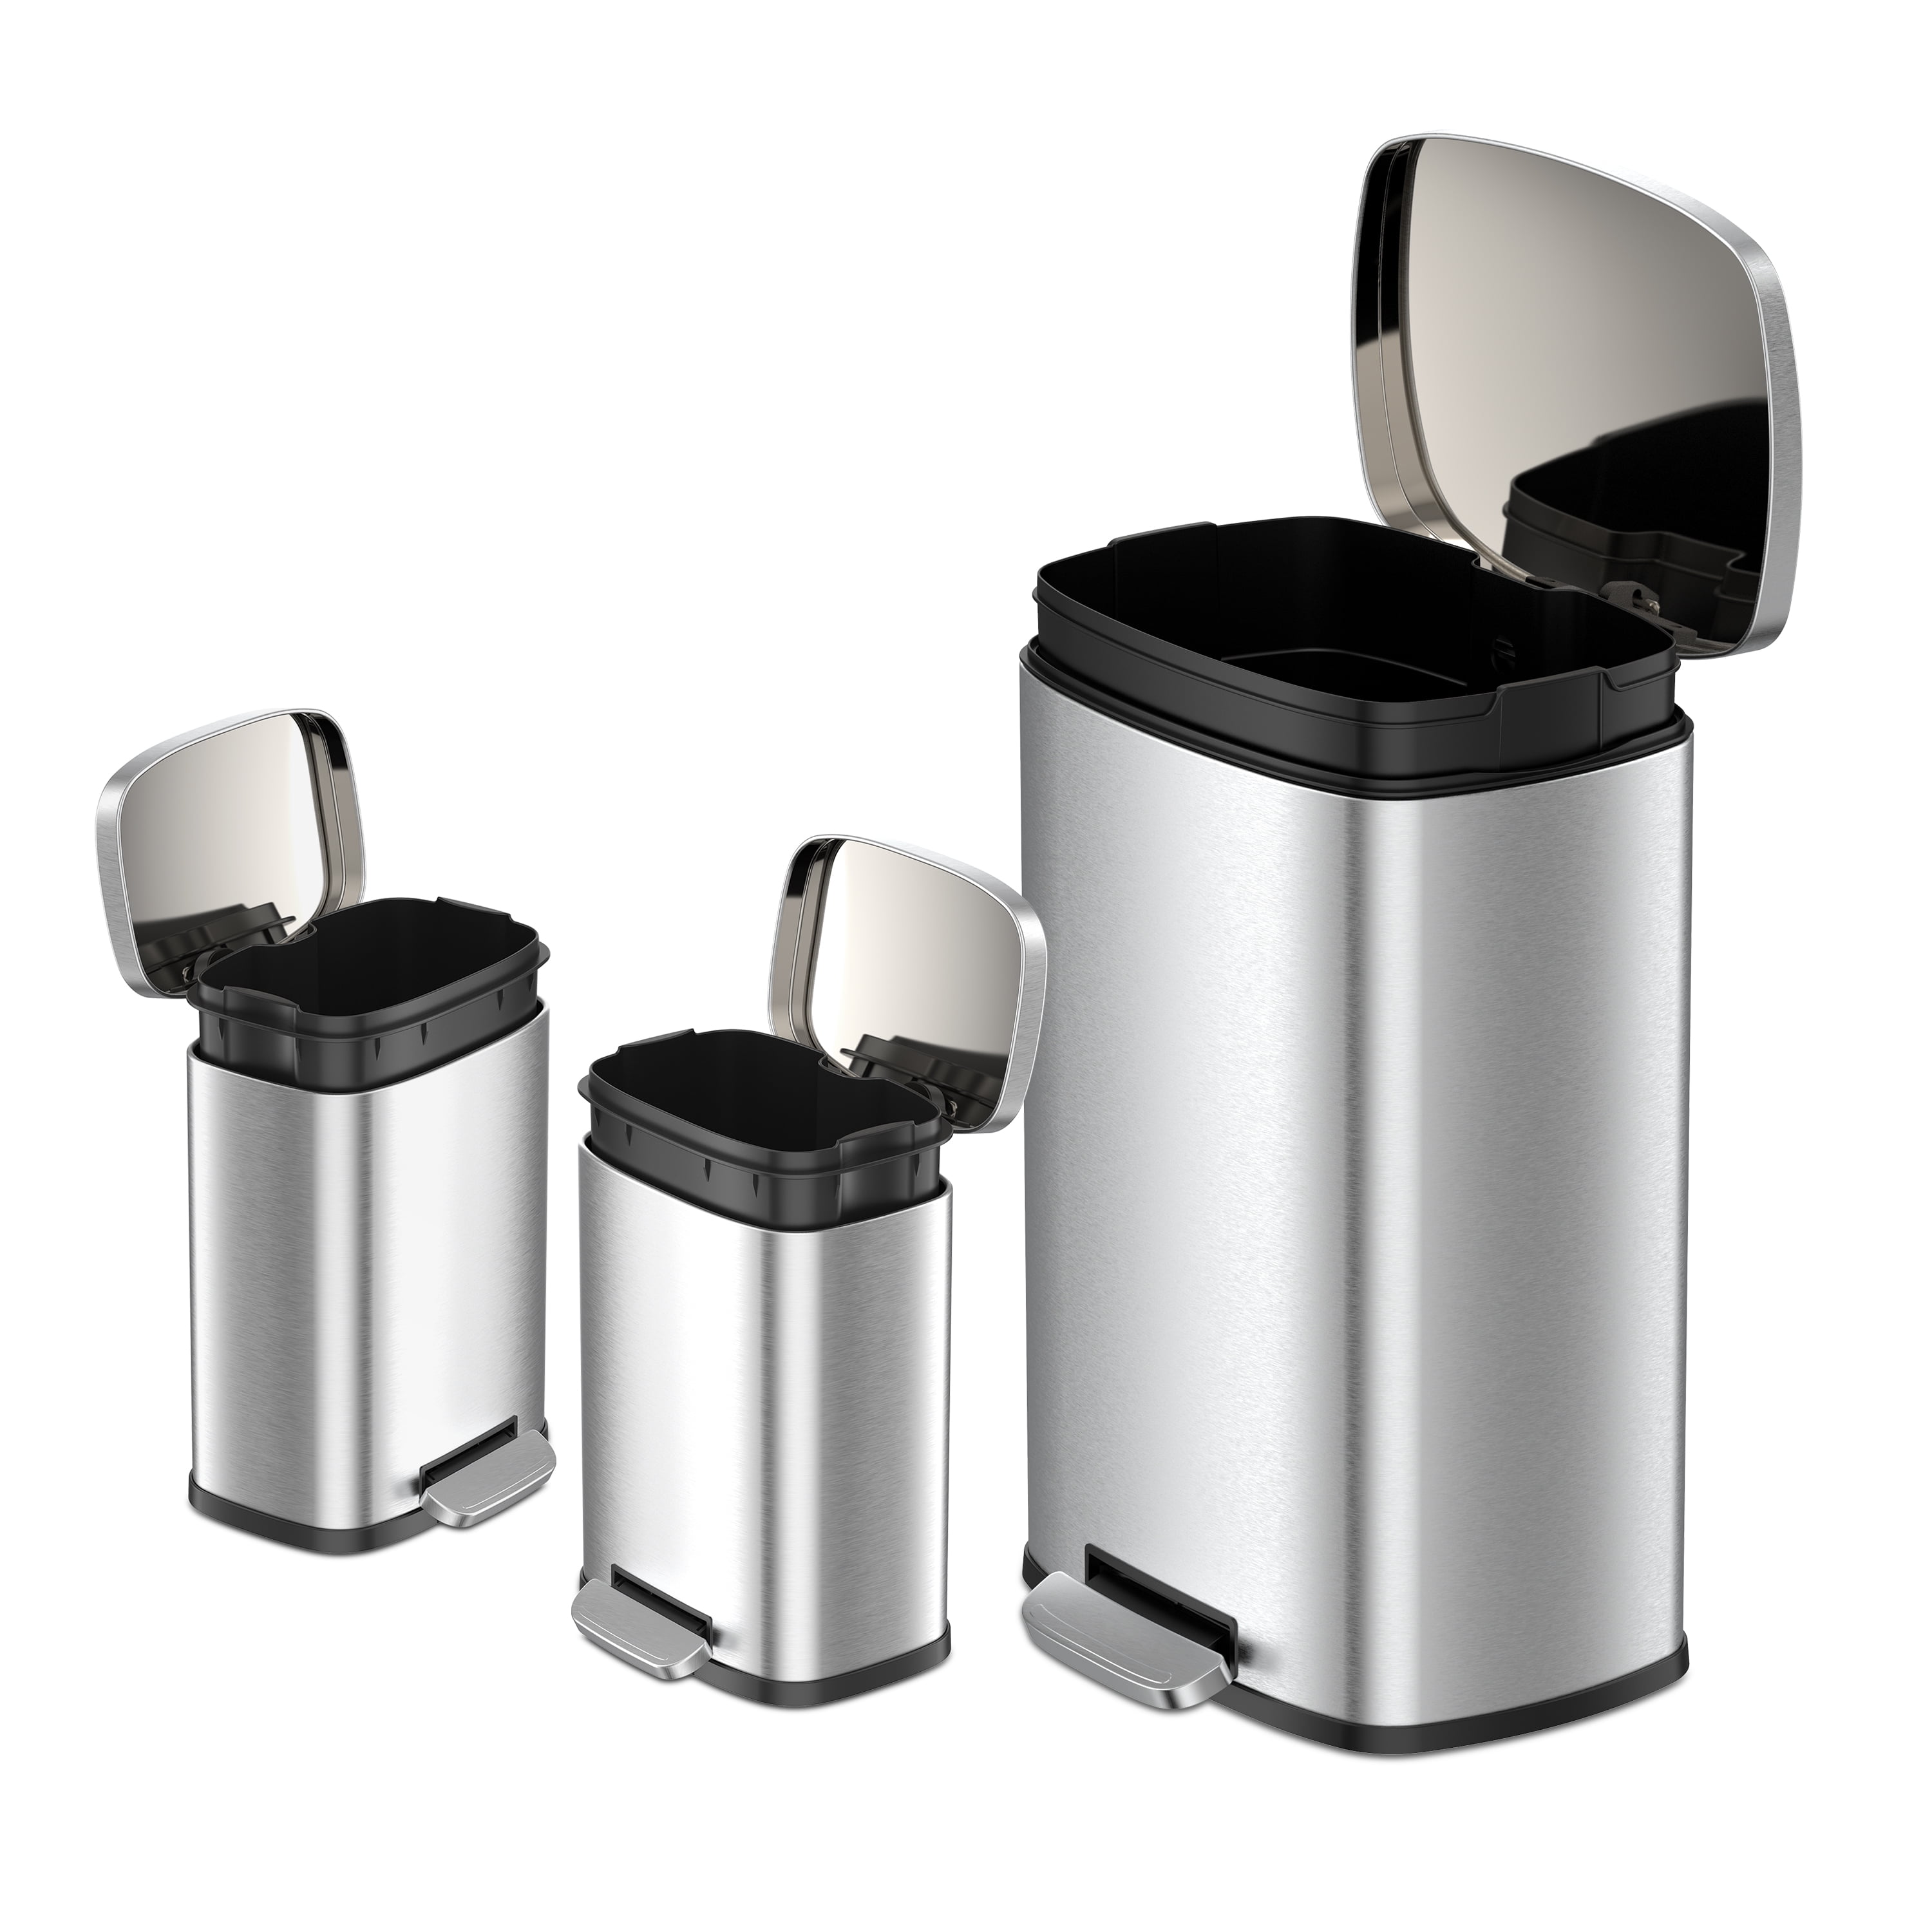 Qualiazero Rectangular Step Garbage Can 3 Piece Combo, 13.2 gal , Two 1.3 gal, Stainless Steel - image 4 of 11